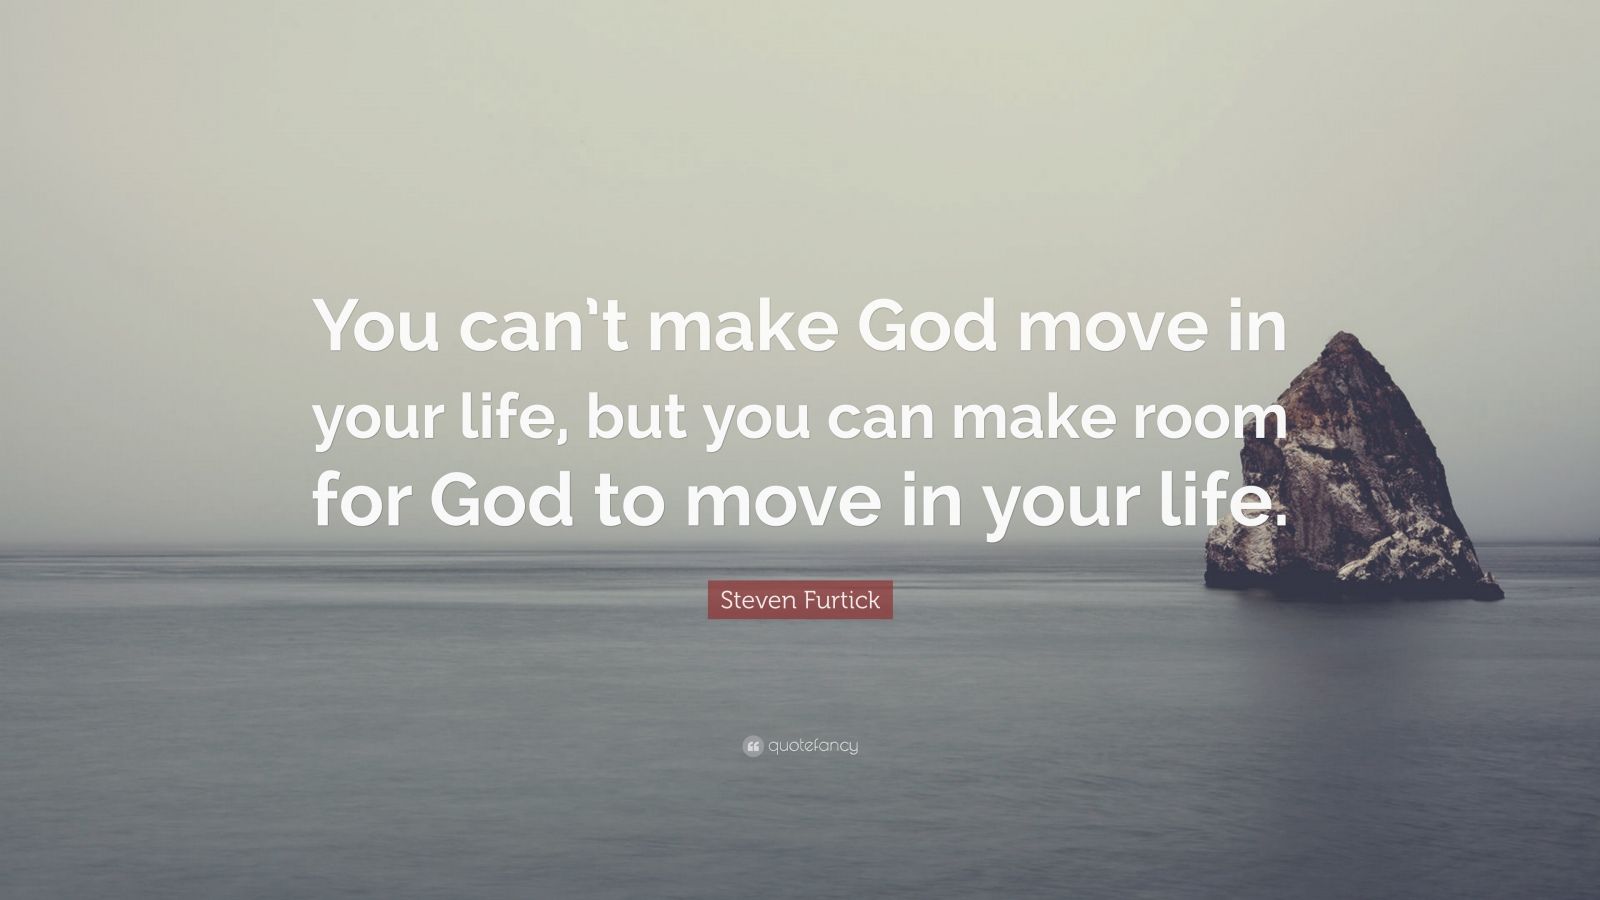 1871645 Steven Furtick Quote You can t make God move in your life but you